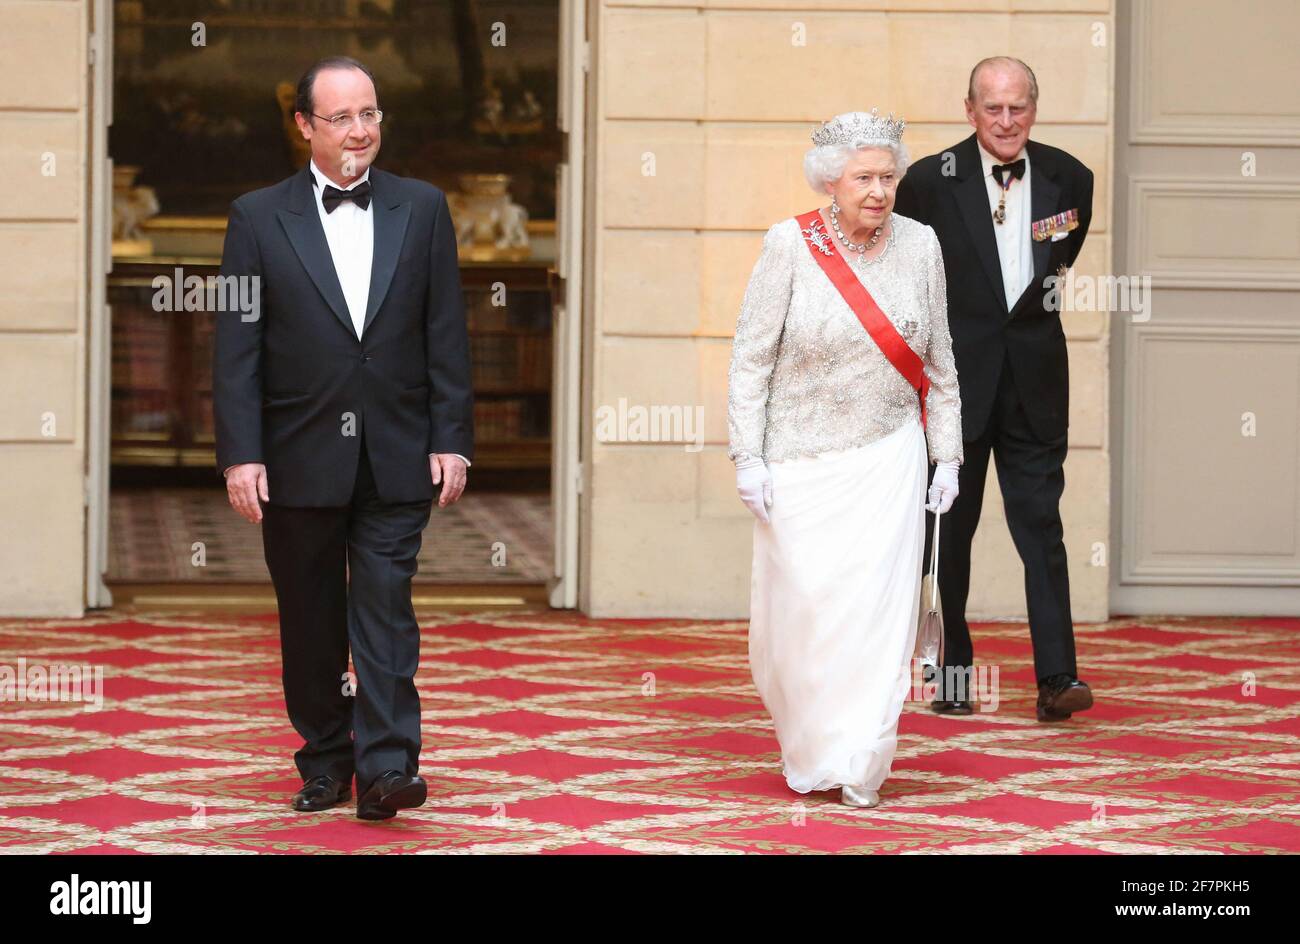 Buckingham Palace has announced Prince Philip, The Duke of Edinburgh, has passed away age 99 - FILE - French President Francois Hollande welcomes Britain's Queen Elizabeth II and her husband Prince Philip upon their arrival for a state dinner with world leaders at the Elysee presidential palace on June 6, 2014 in Paris, France, following an international D-Day commemoration ceremony on the beach of Ouistreham, Normandy, on marking the 70th anniversary of the World War II Allied landings in Normandy. Photo by Hamilton/Pool/ABACAPRESS./Alamy Live News Stock Photo